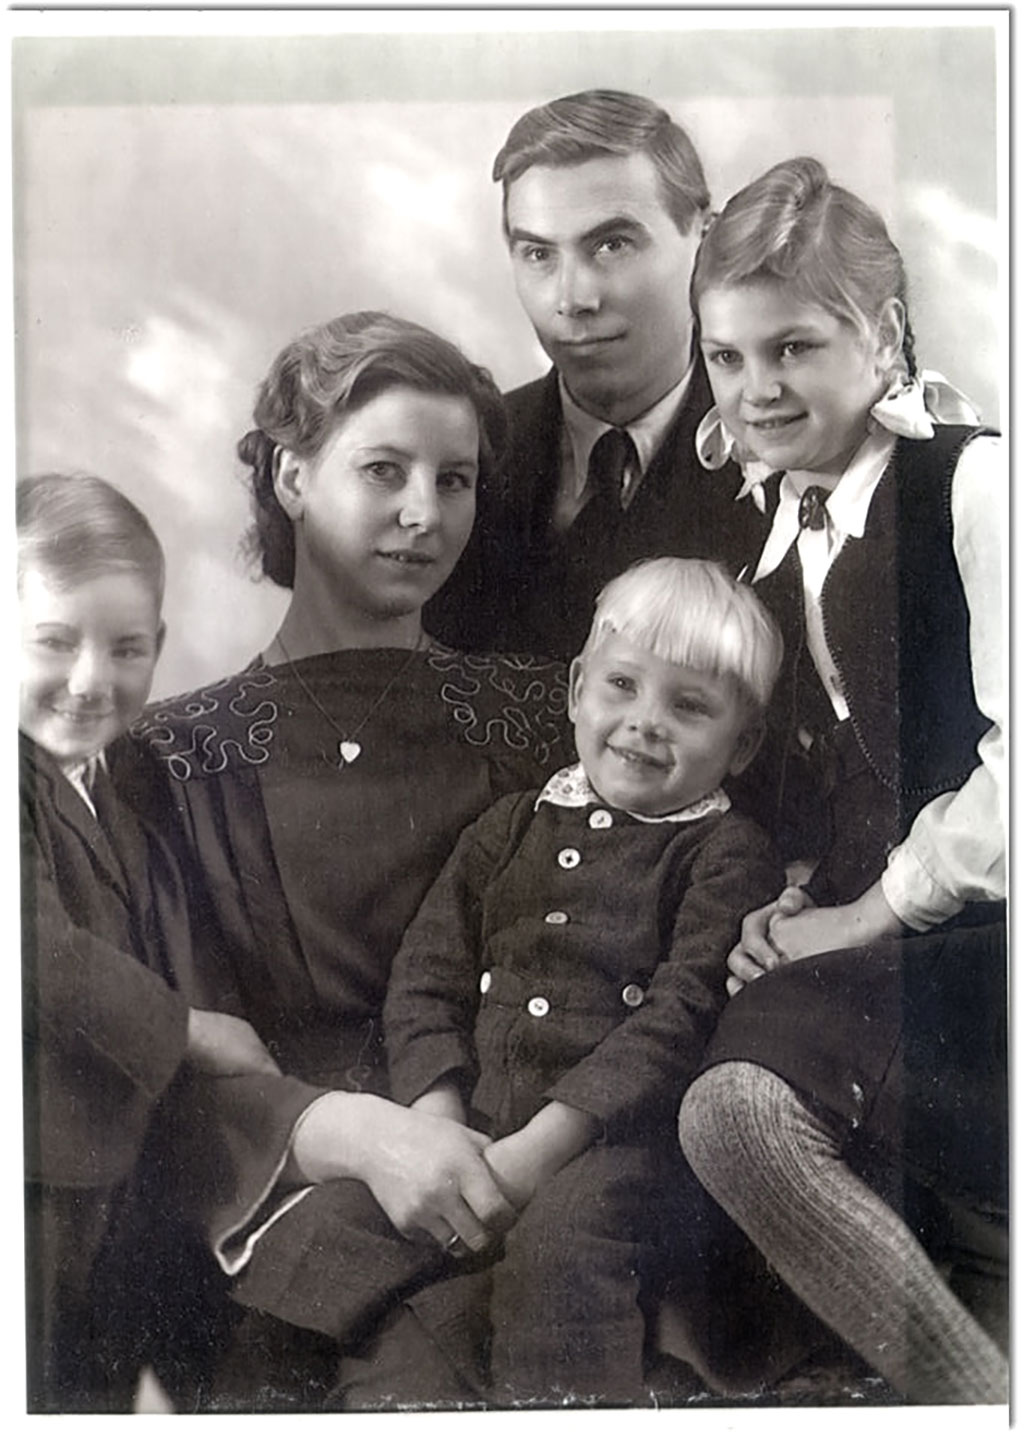 A portrait studio style black and white photograph of the Bruehler family of five with soft smiles in dress clothes.